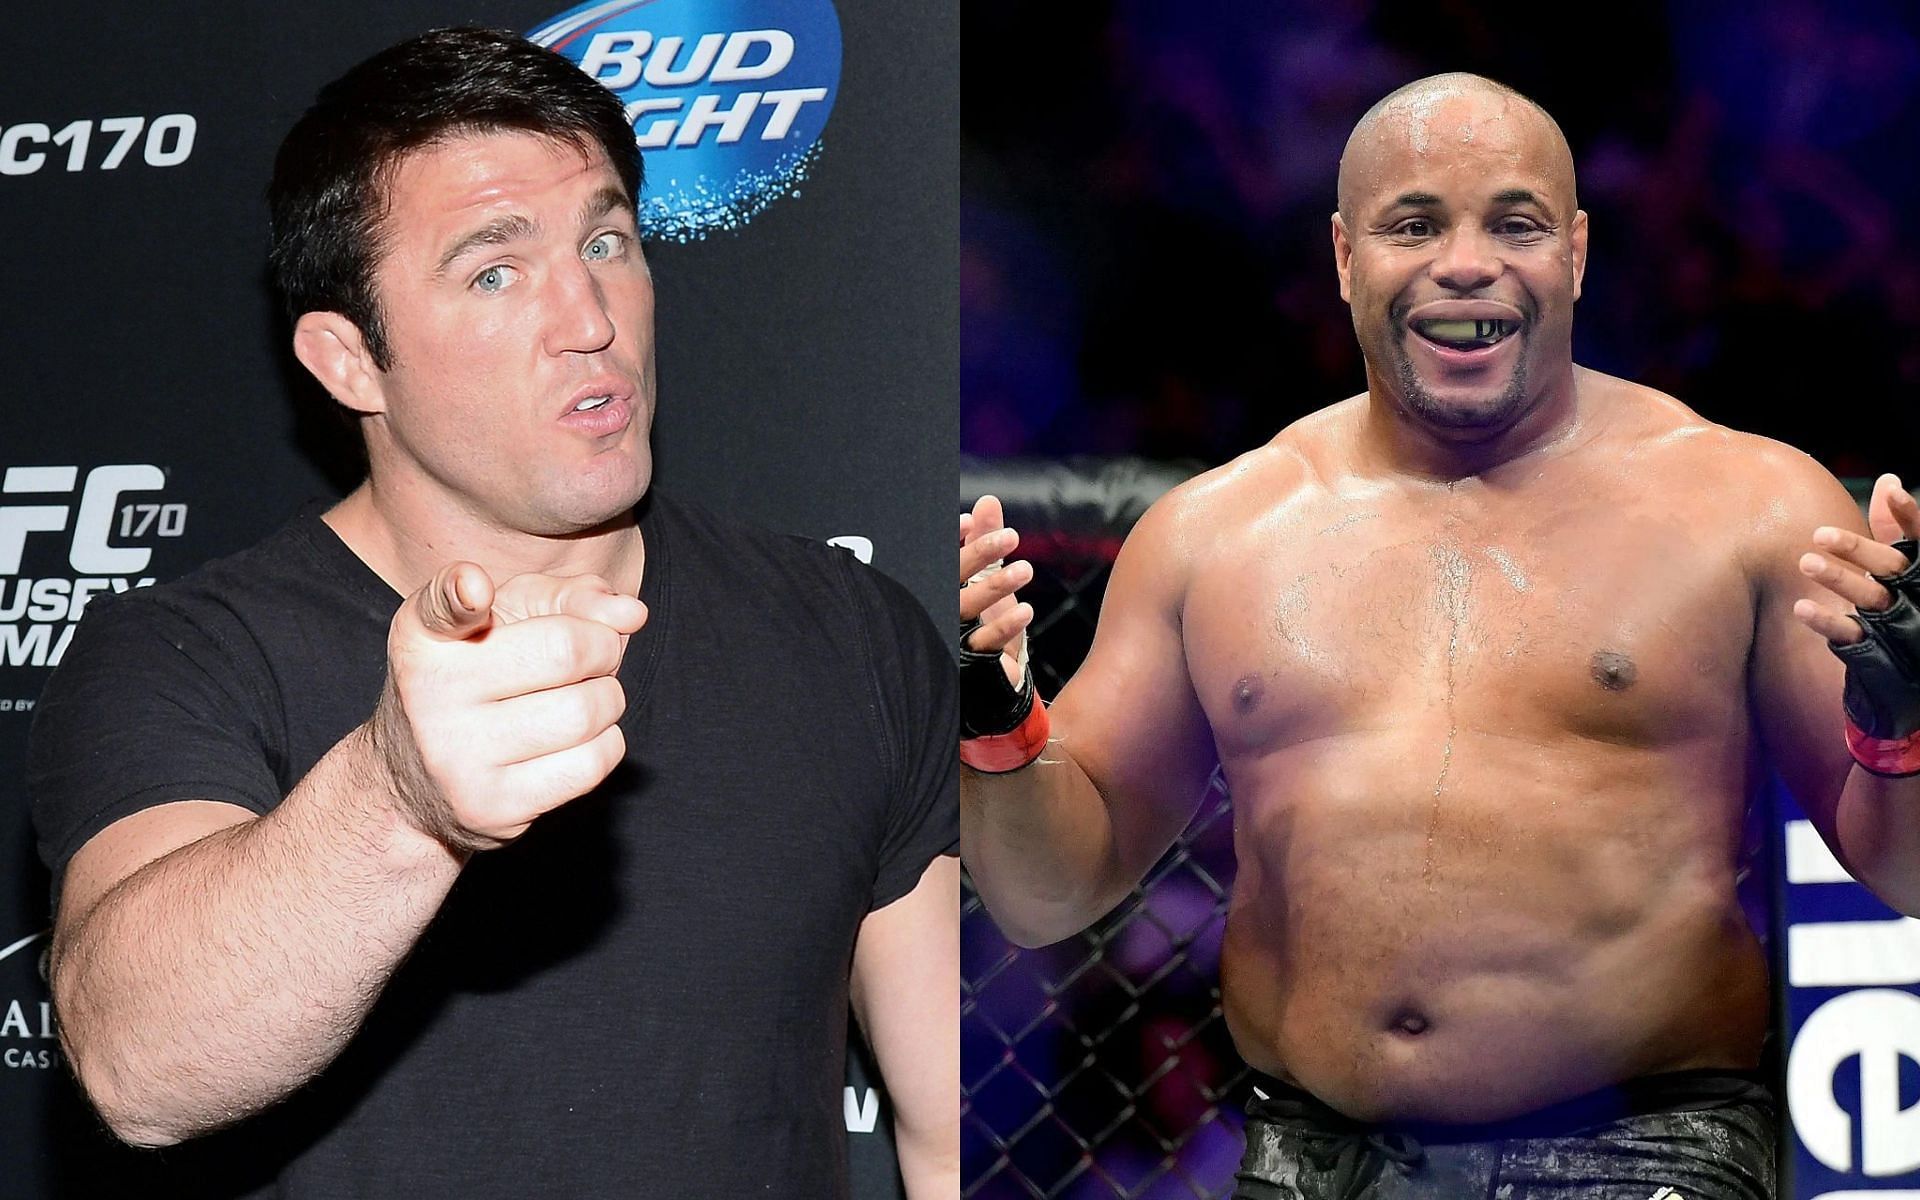 Chael Sonnen (left) and Daniel Cormier (right) [Images courtesy of Getty]